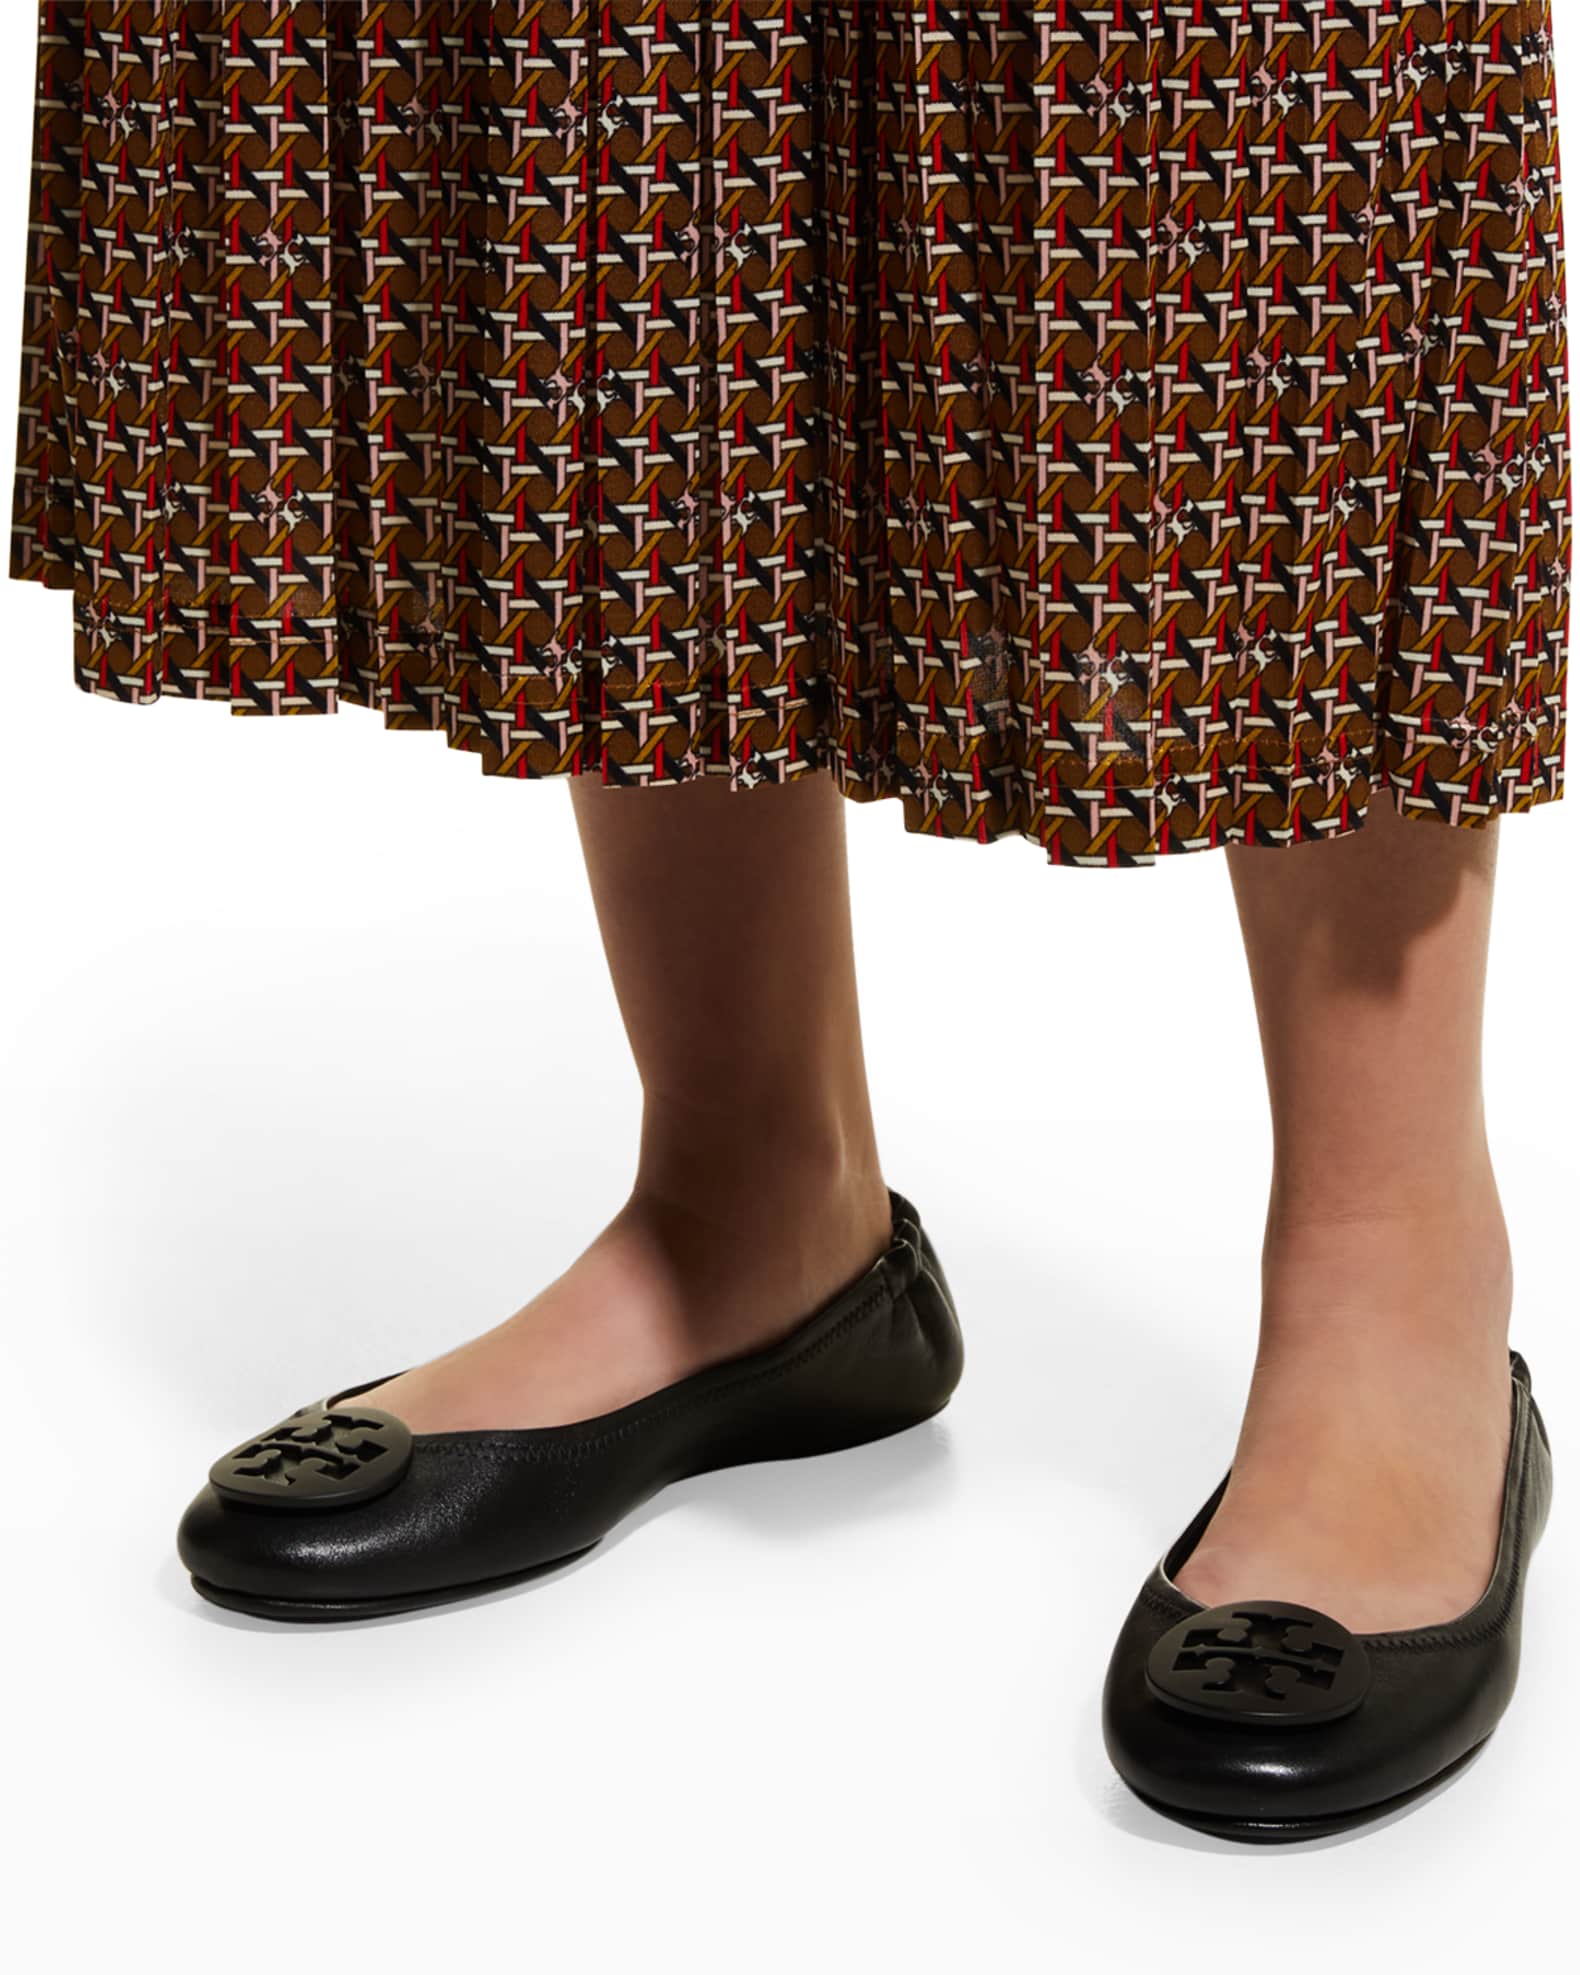 Tory Burch Minnie Travel Leather Ballet Flats | Neiman Marcus